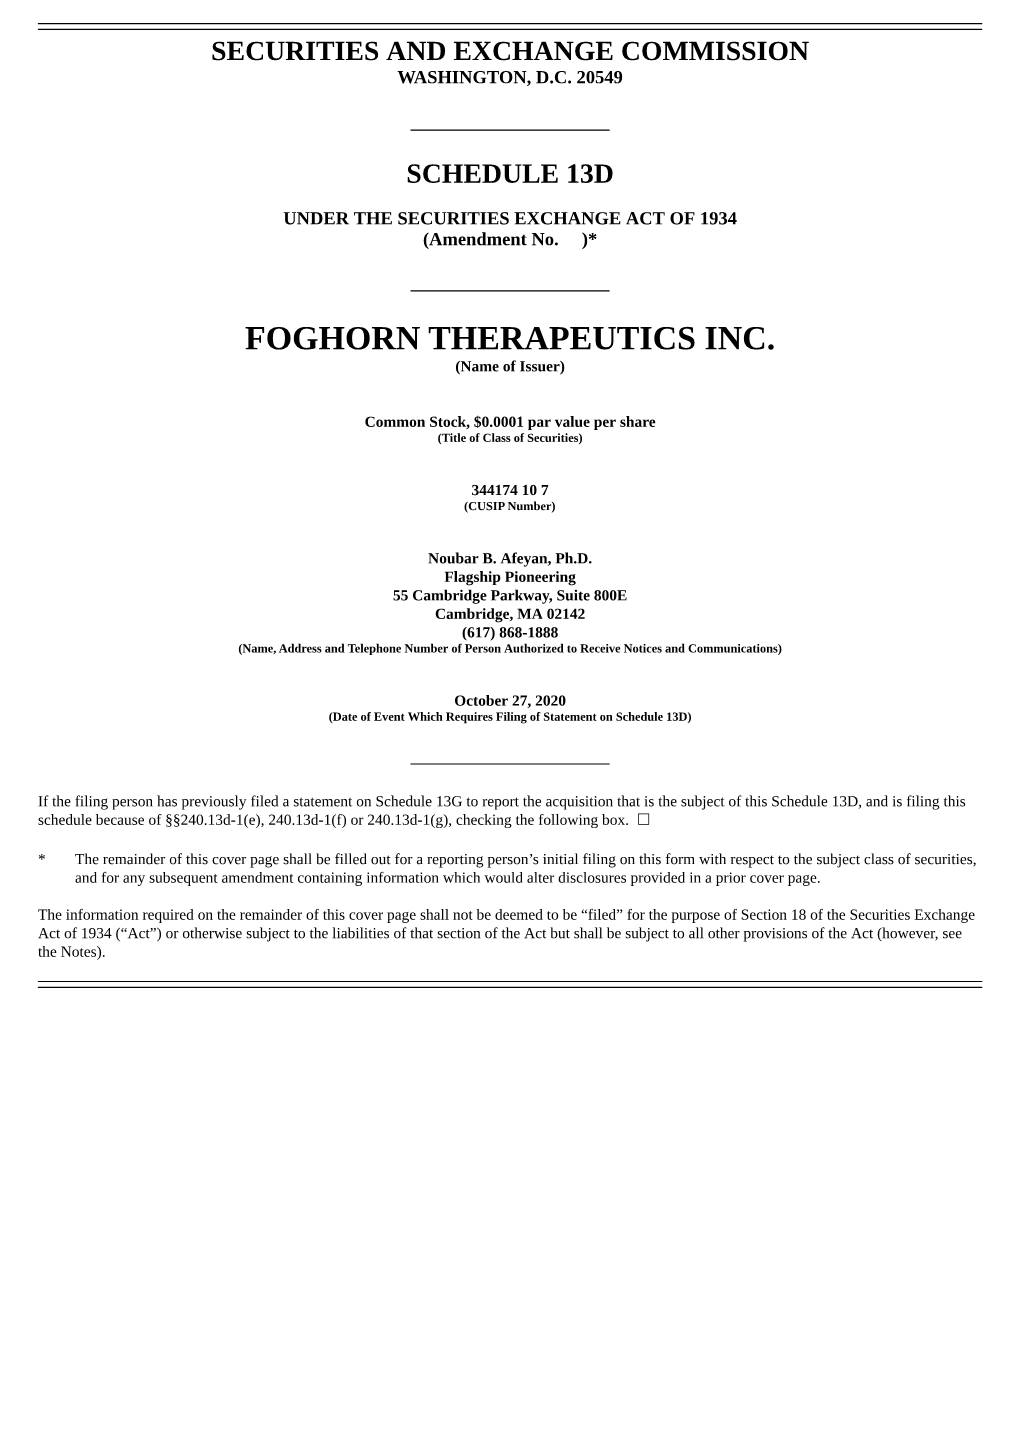 FOGHORN THERAPEUTICS INC. (Name of Issuer)